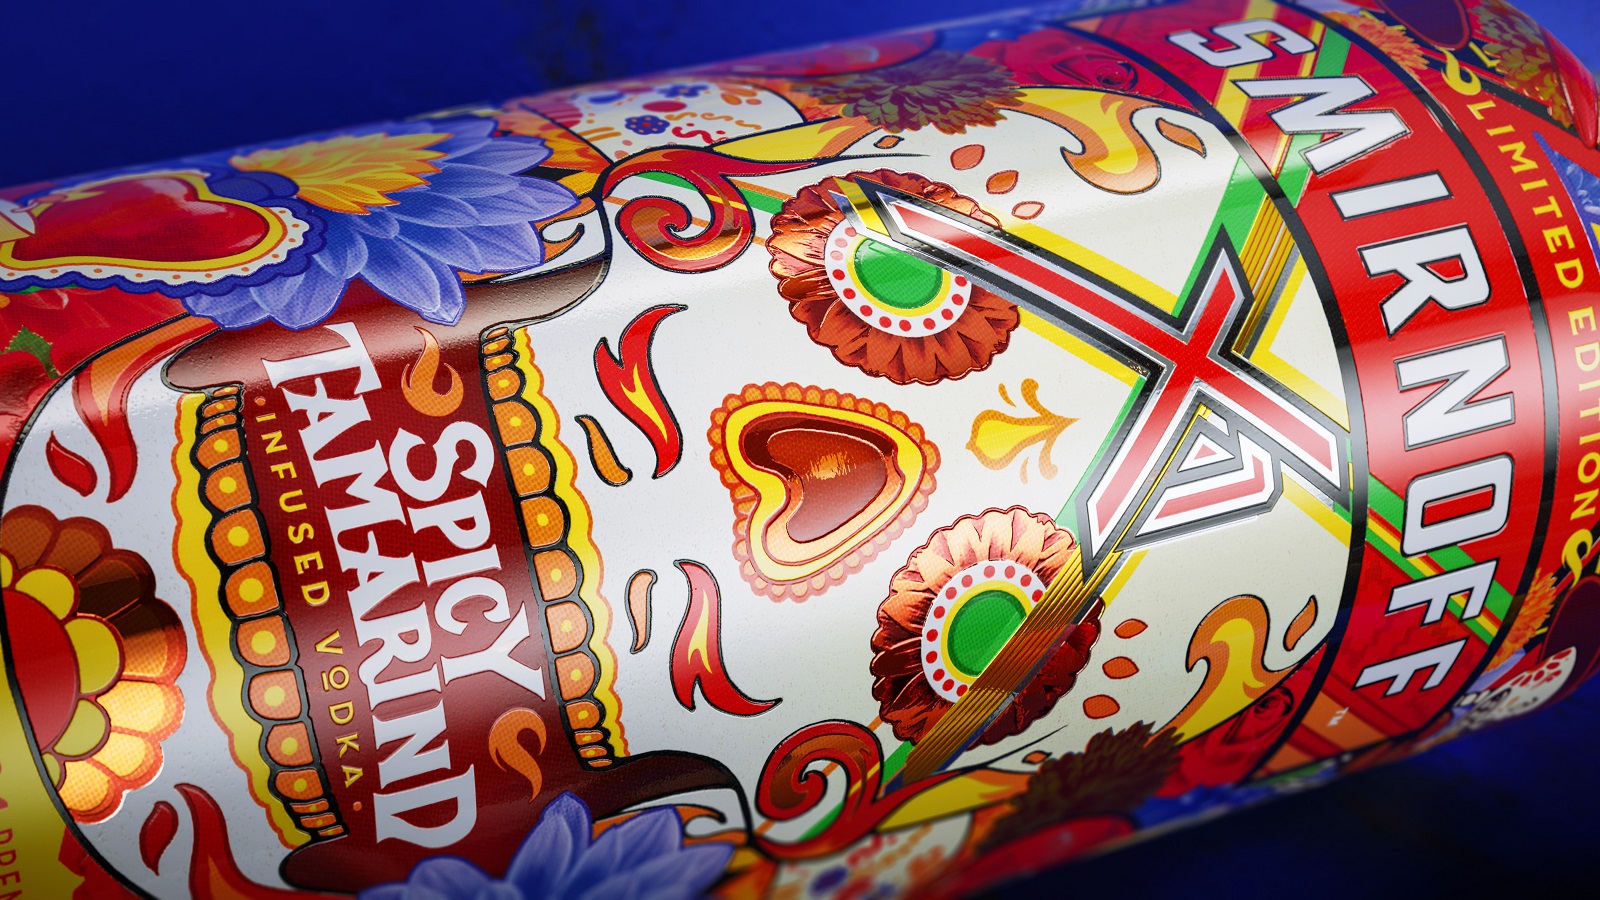 Smirnoff Gets Spicy with Day of the Dead Motifs